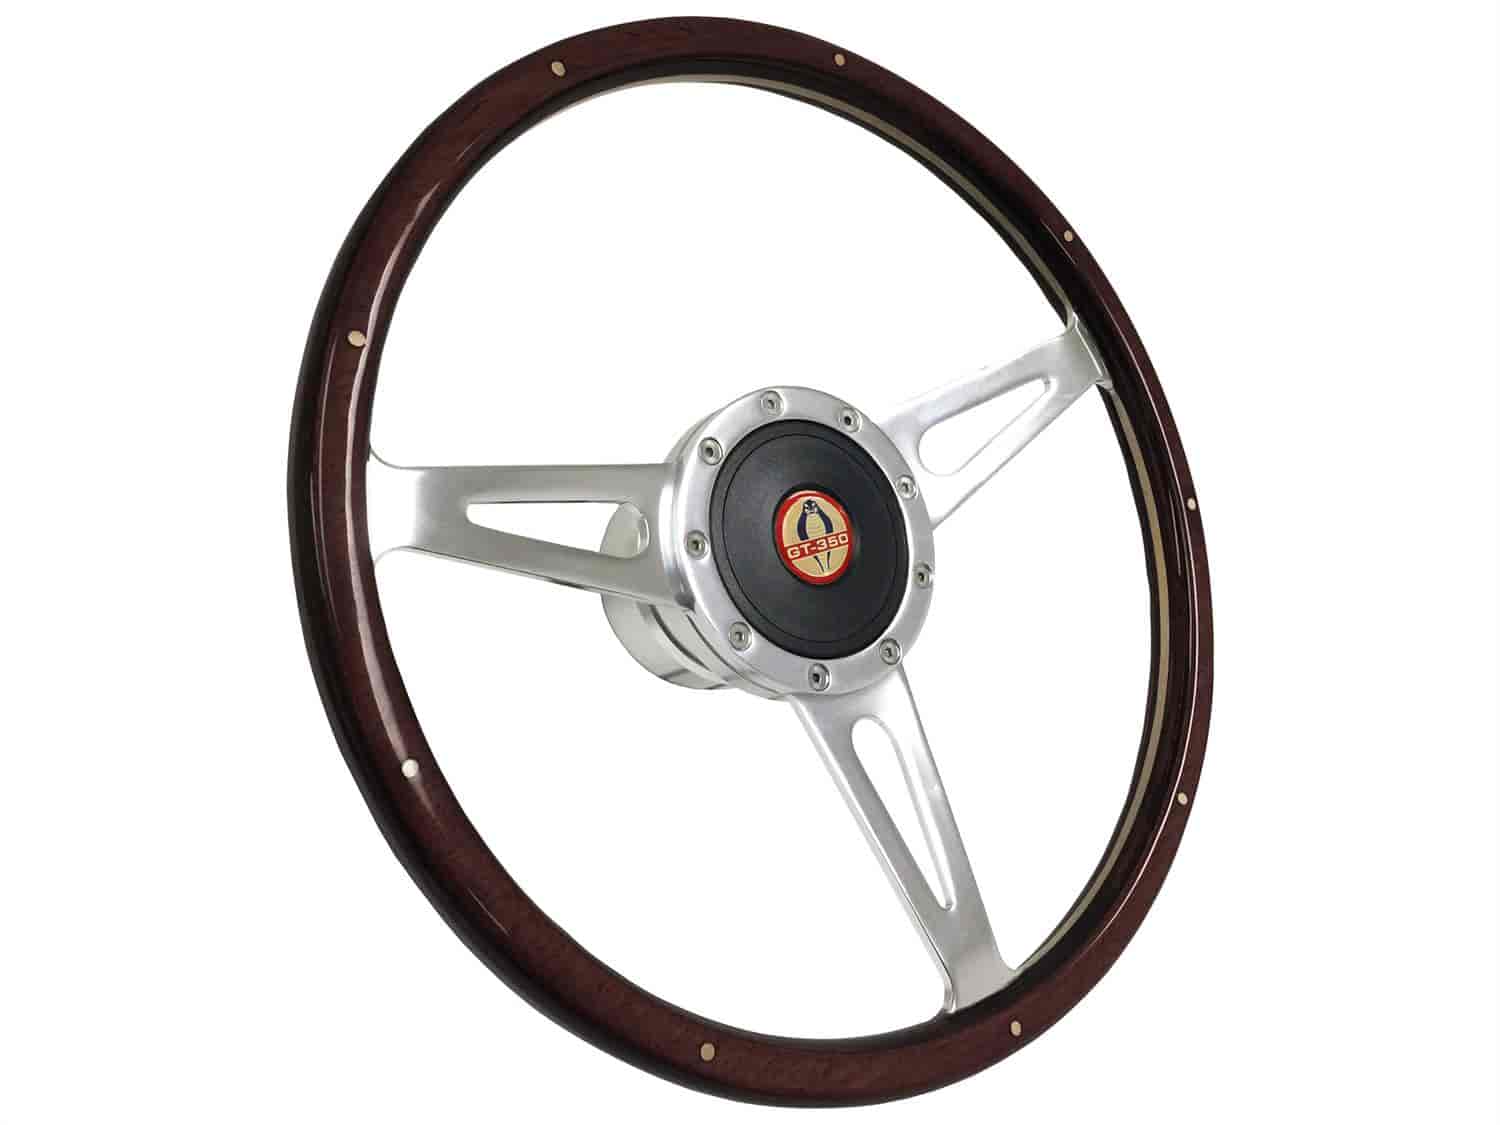 S9 Classic Steering Wheel Kit 1968-91 Ford/Mercury, 15 in. Diameter, Espresso Stained Wood Grip, w/ 9-Bolt Adapter & Horn Button